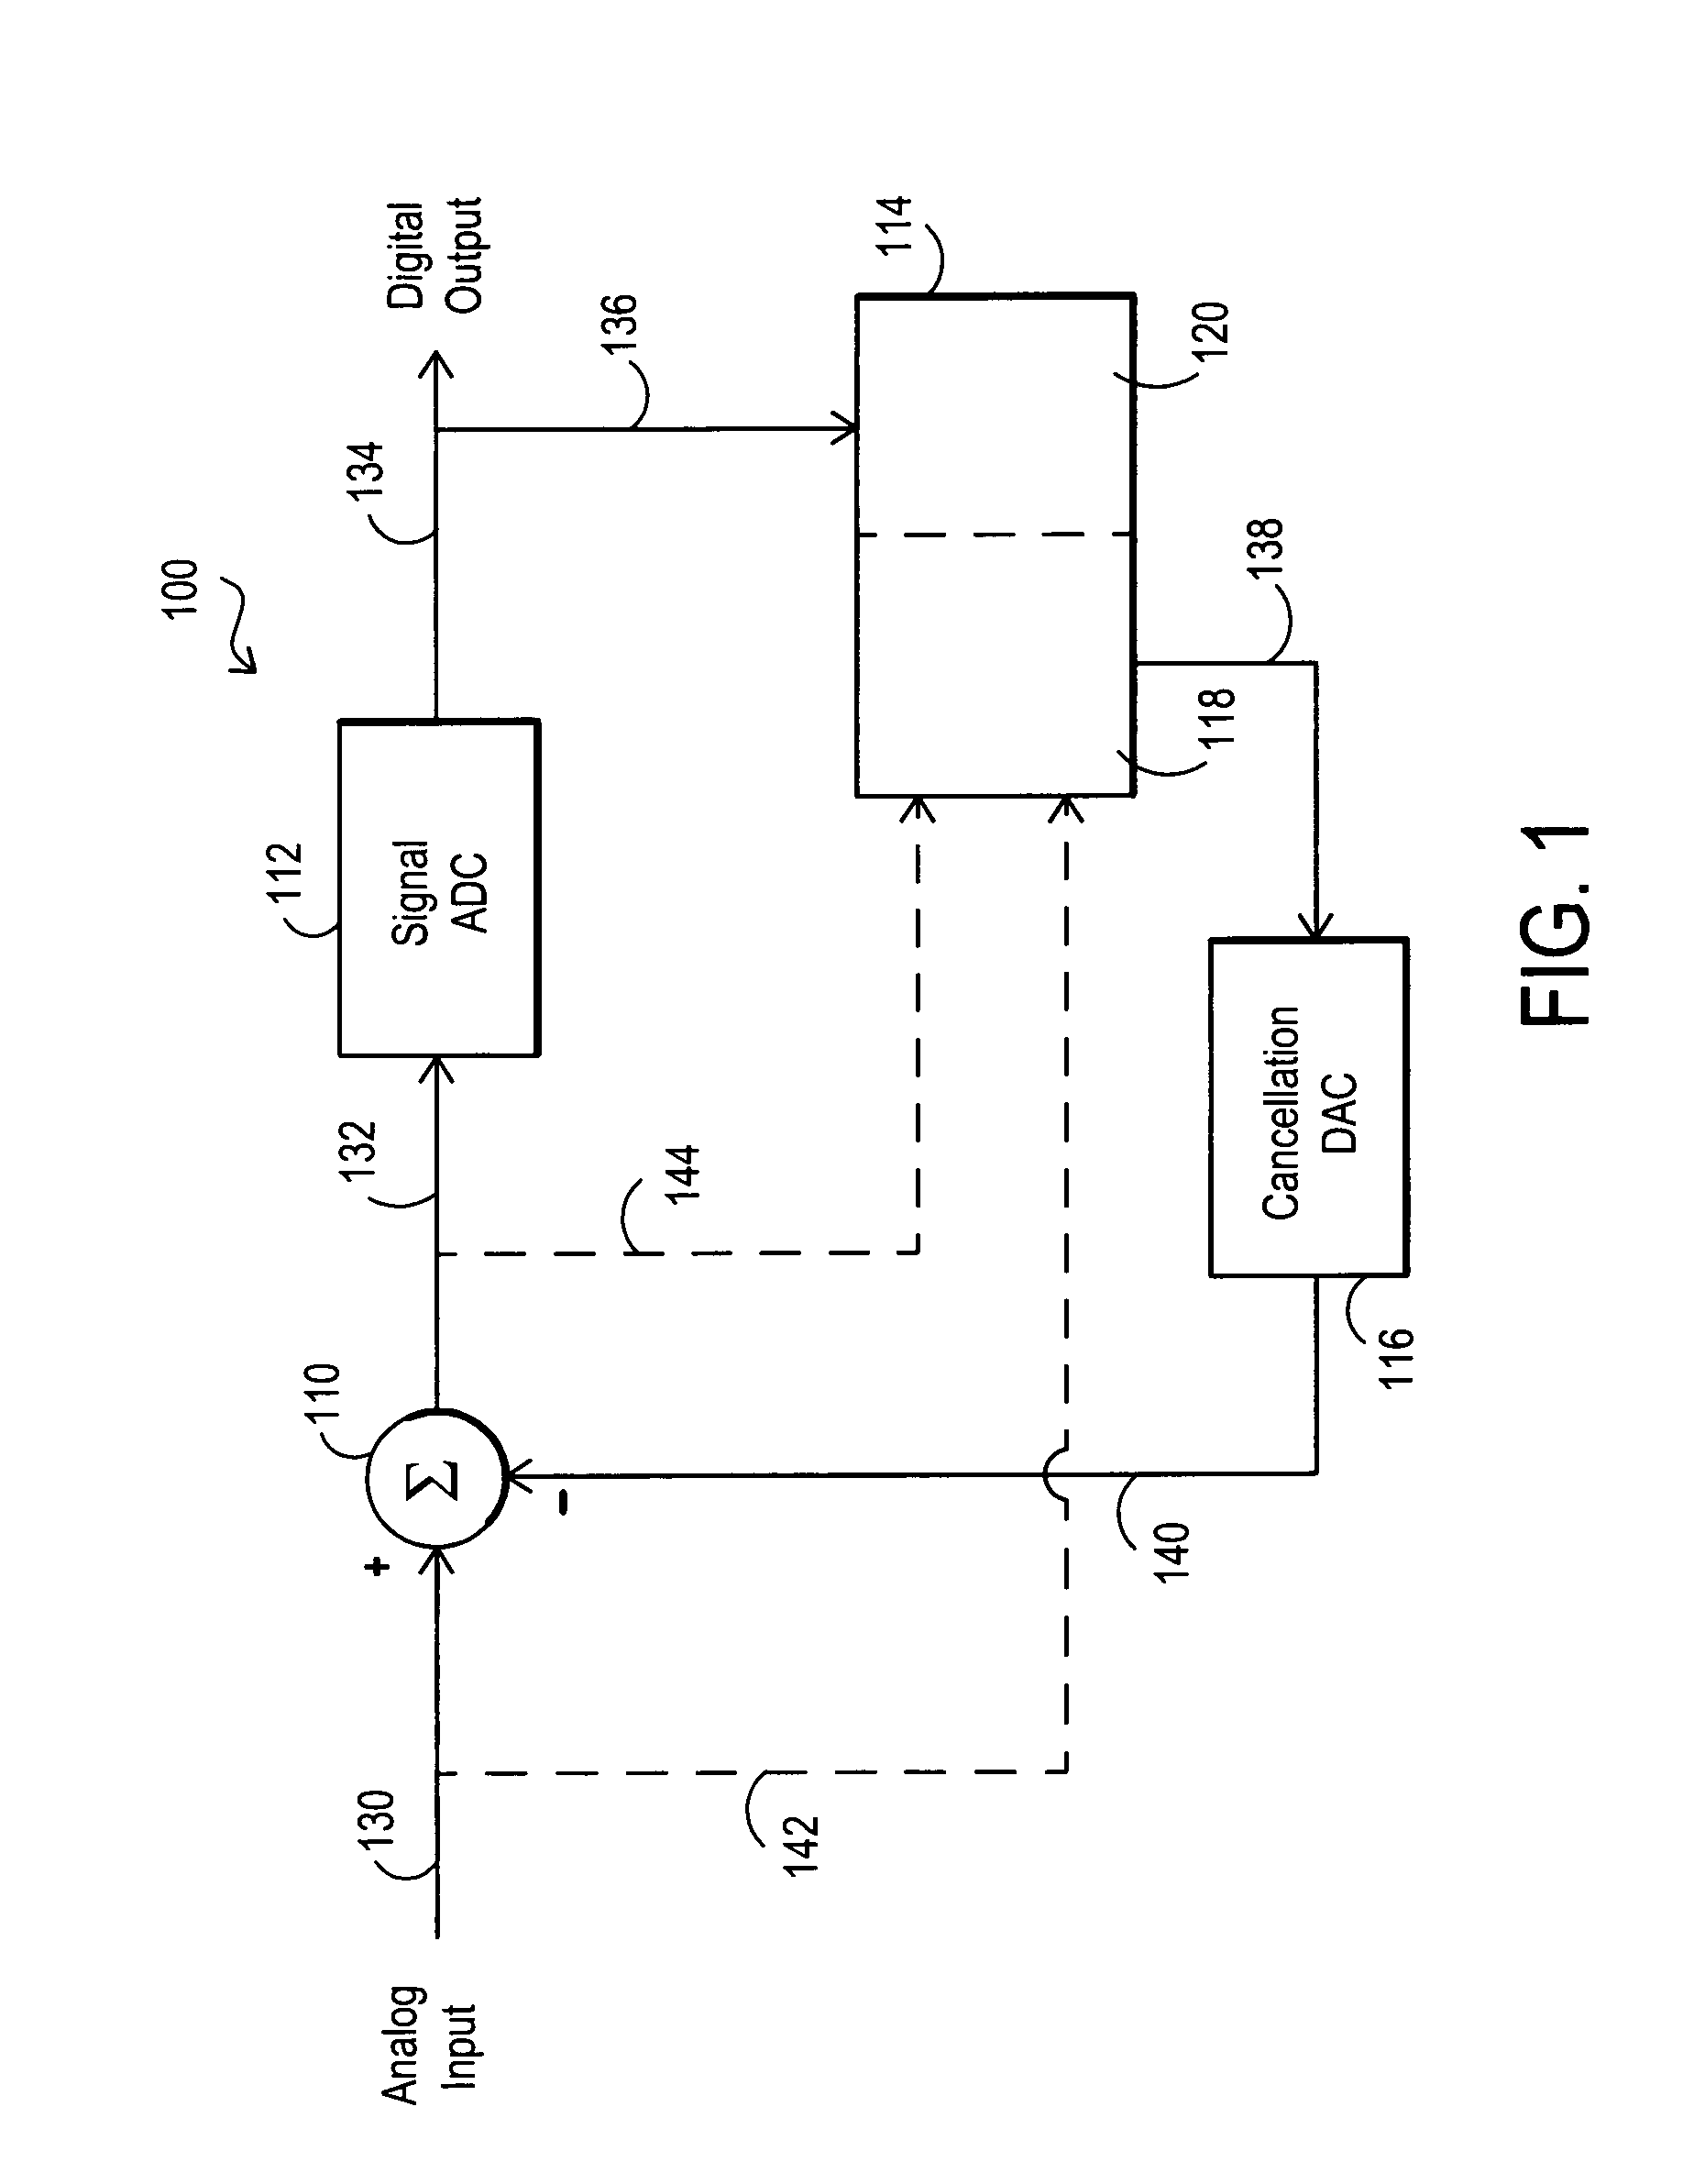 Systems and methods for multi-channel analog to digital conversion